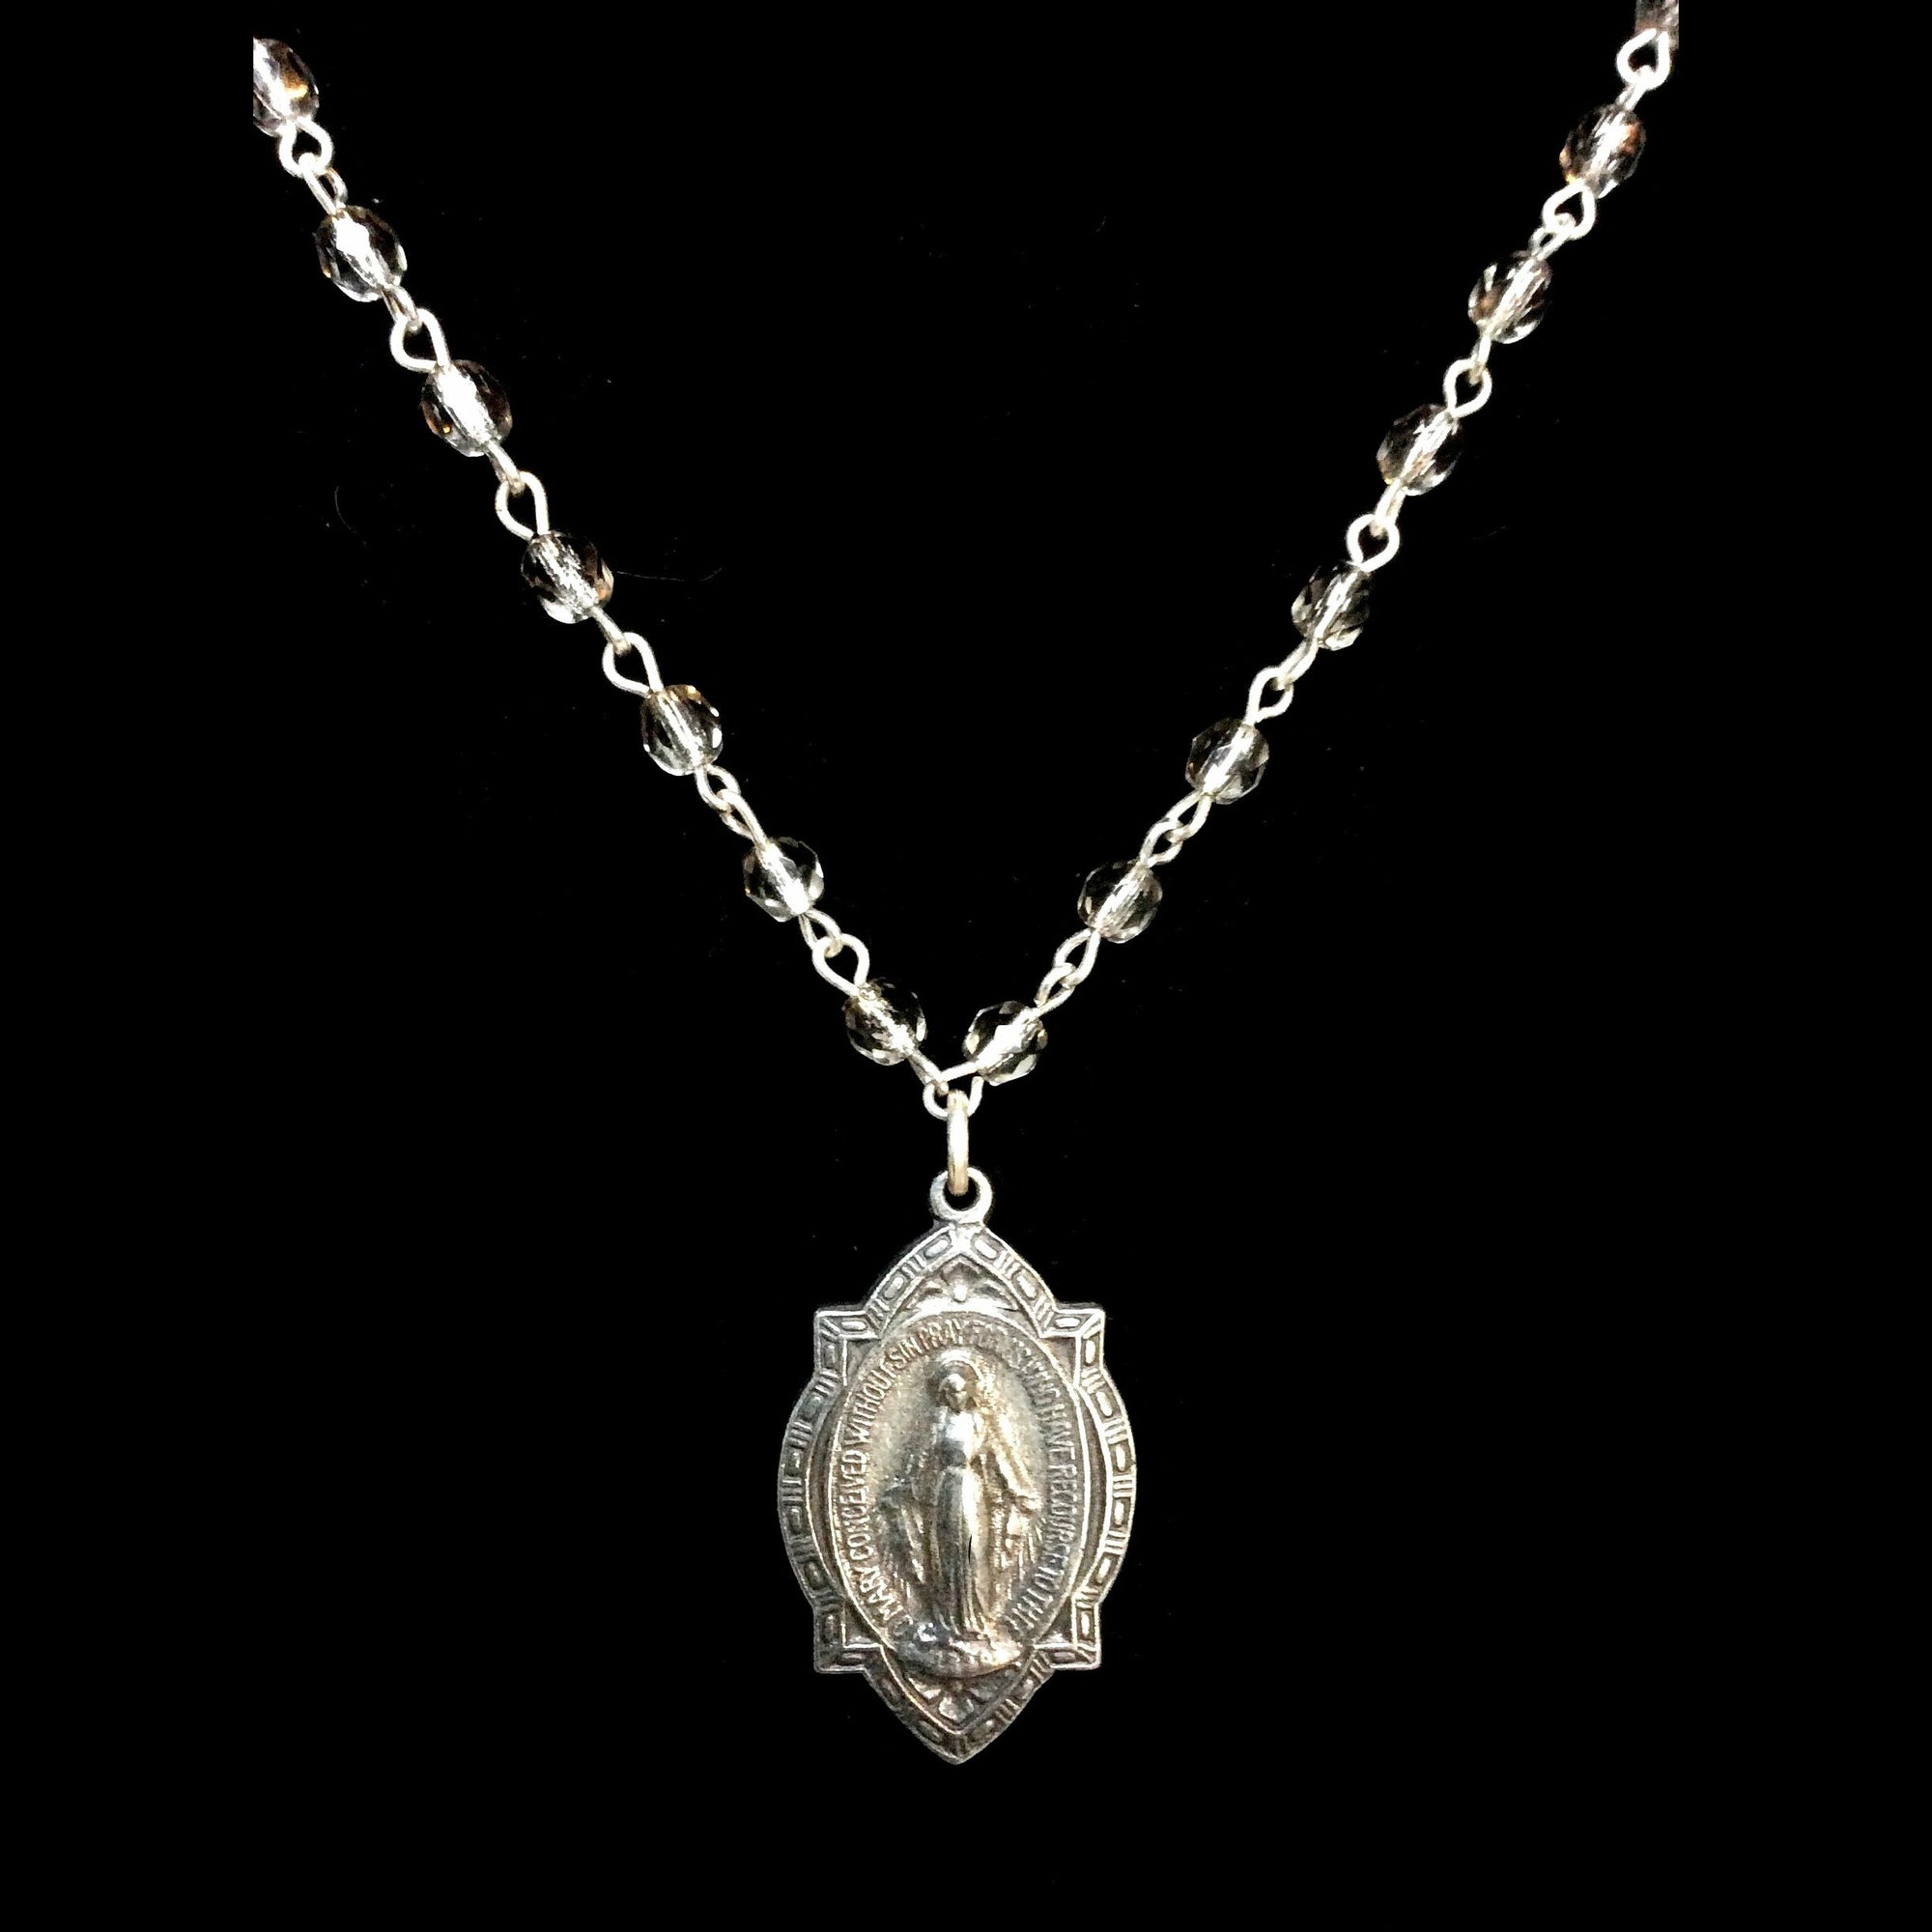 Forgotten Graces Miraculous Medal in Black Diamond and Silver ...